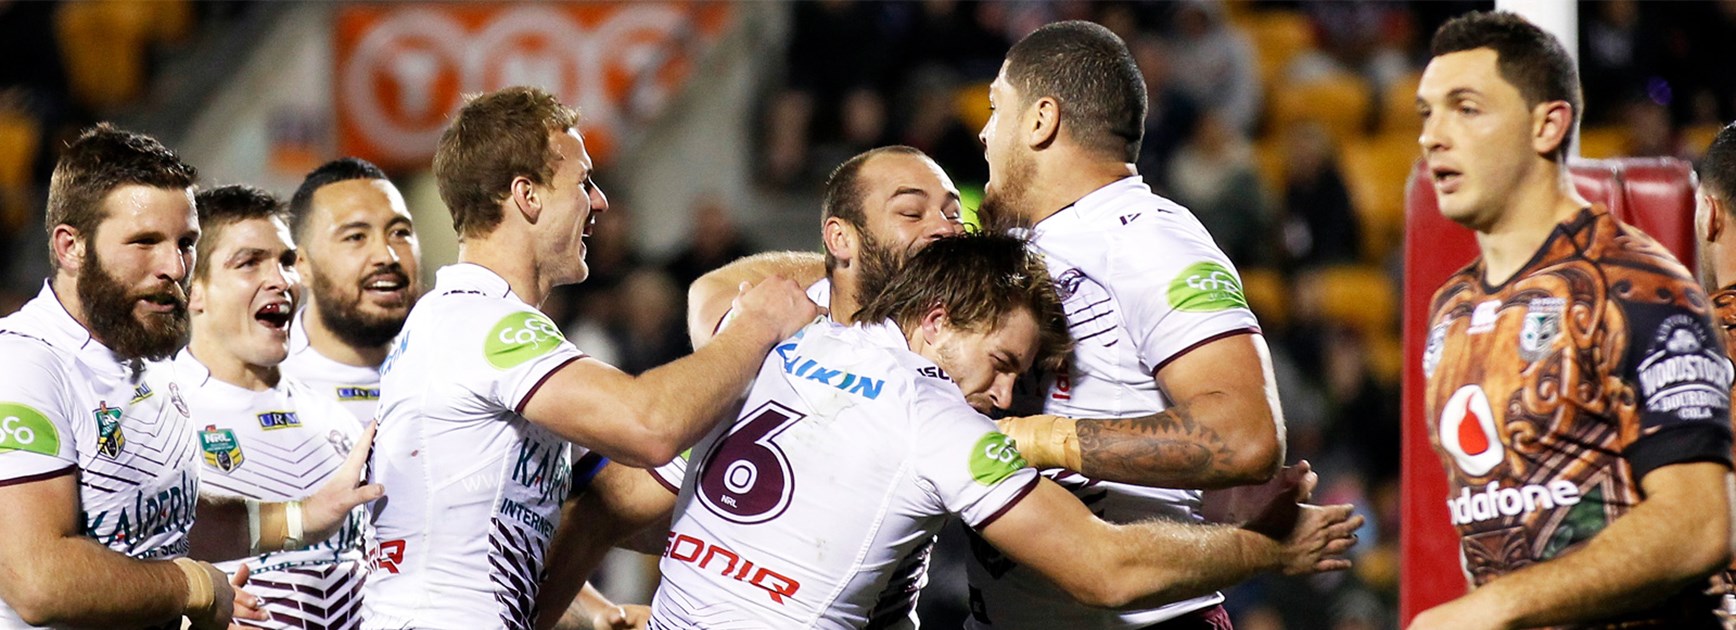 The Sea Eagles were superb despite suffering four injuries against the Warriors in Auckland in Round 20.